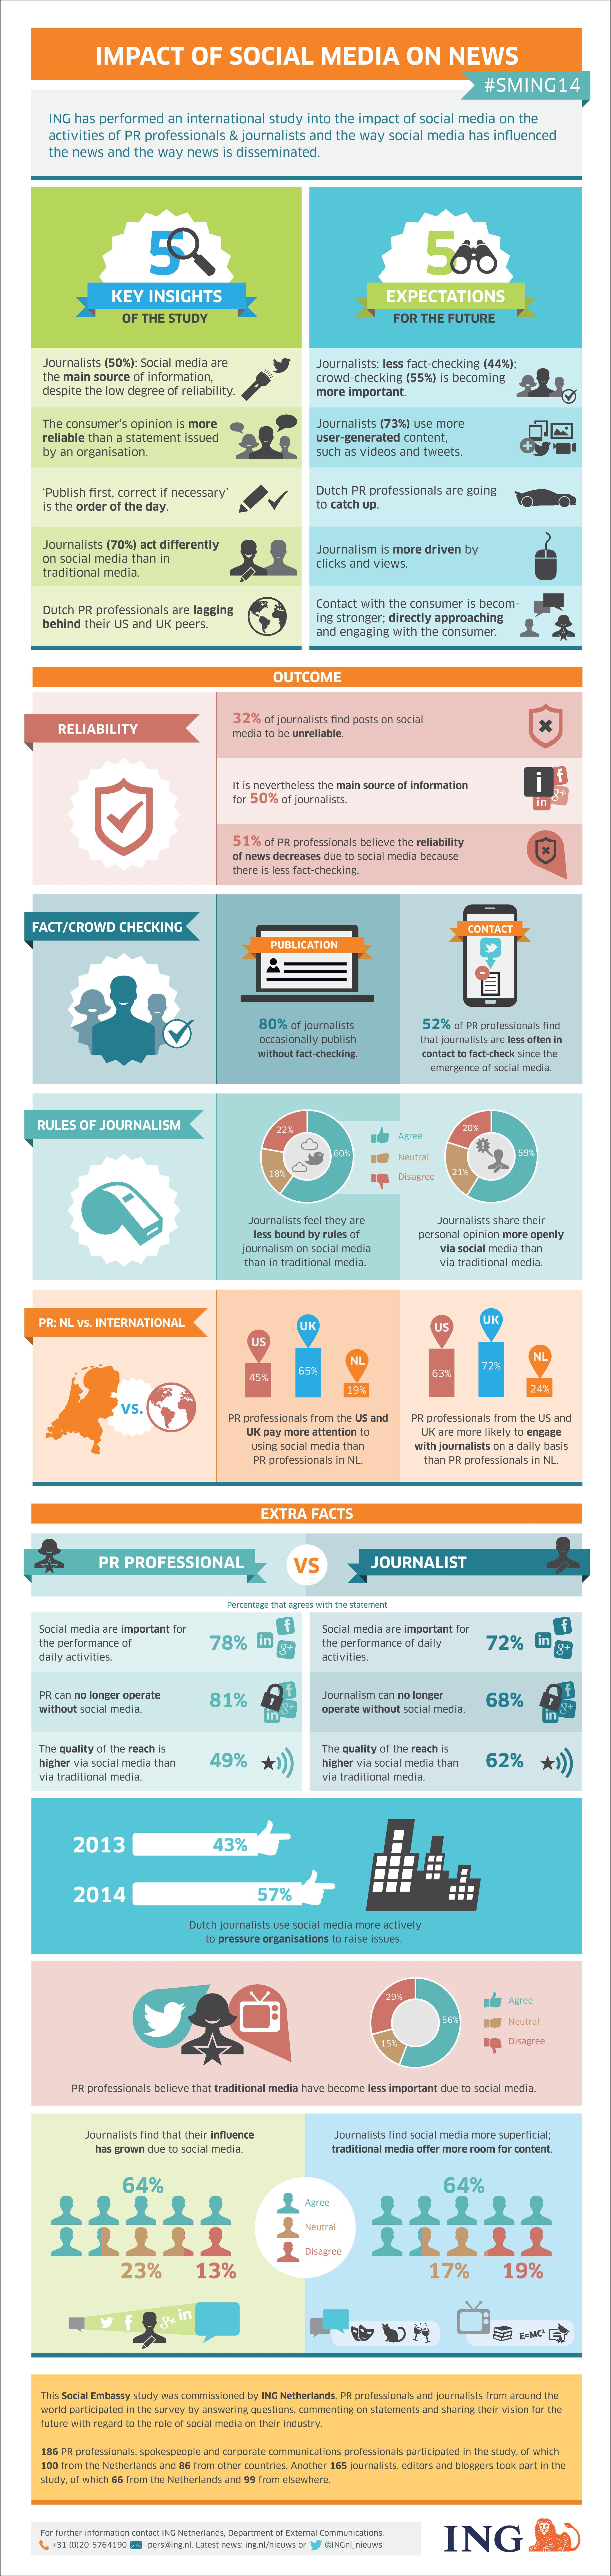 Infographic: Impact of Social Media on News